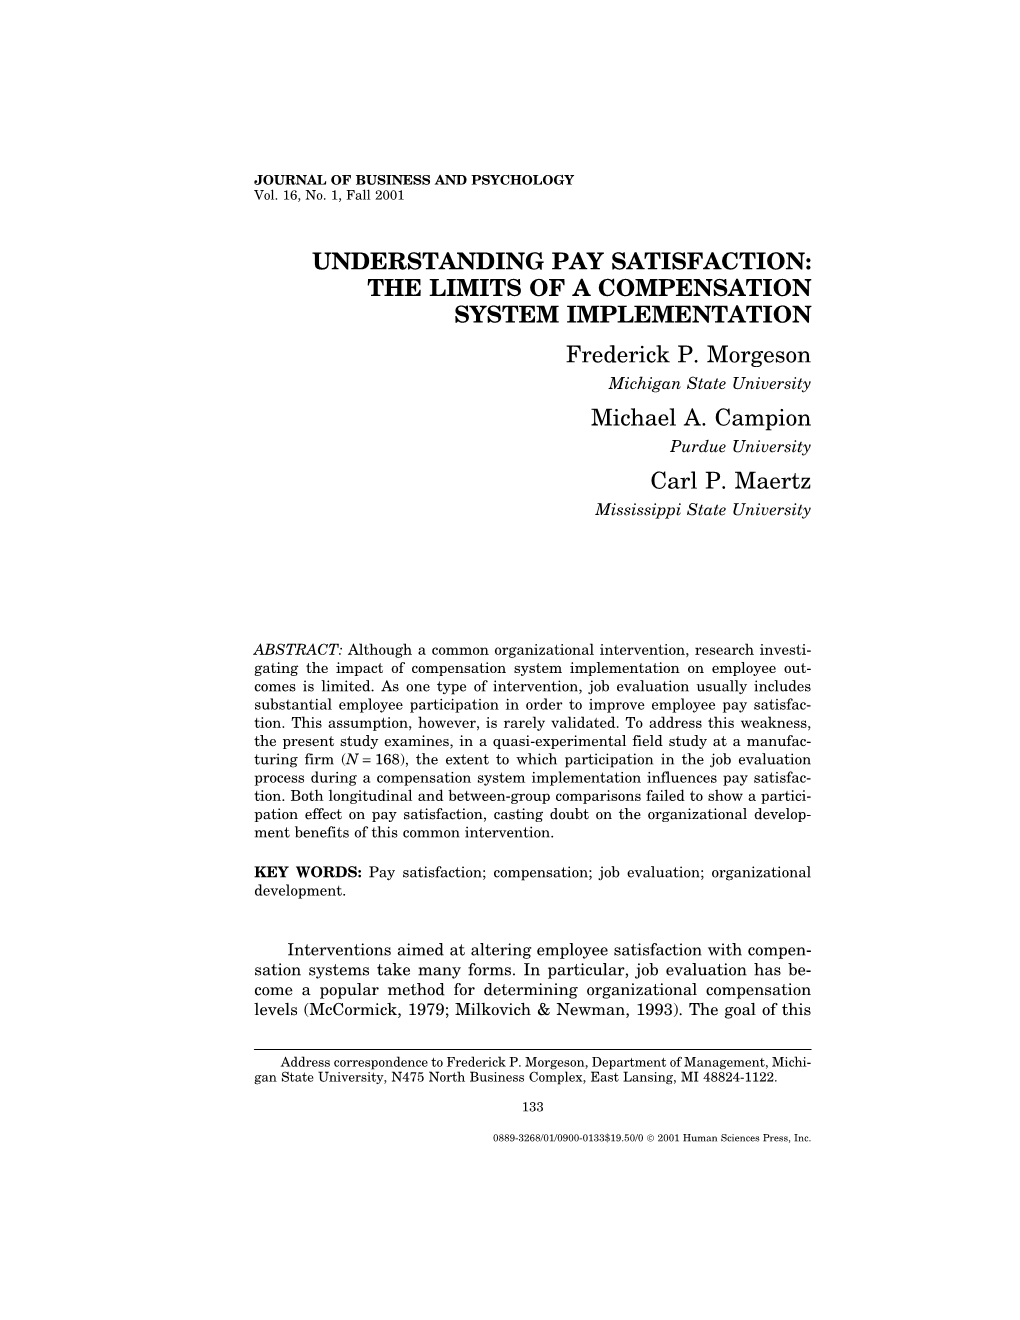 UNDERSTANDING PAY SATISFACTION: the LIMITS of a COMPENSATION SYSTEM IMPLEMENTATION Frederick P